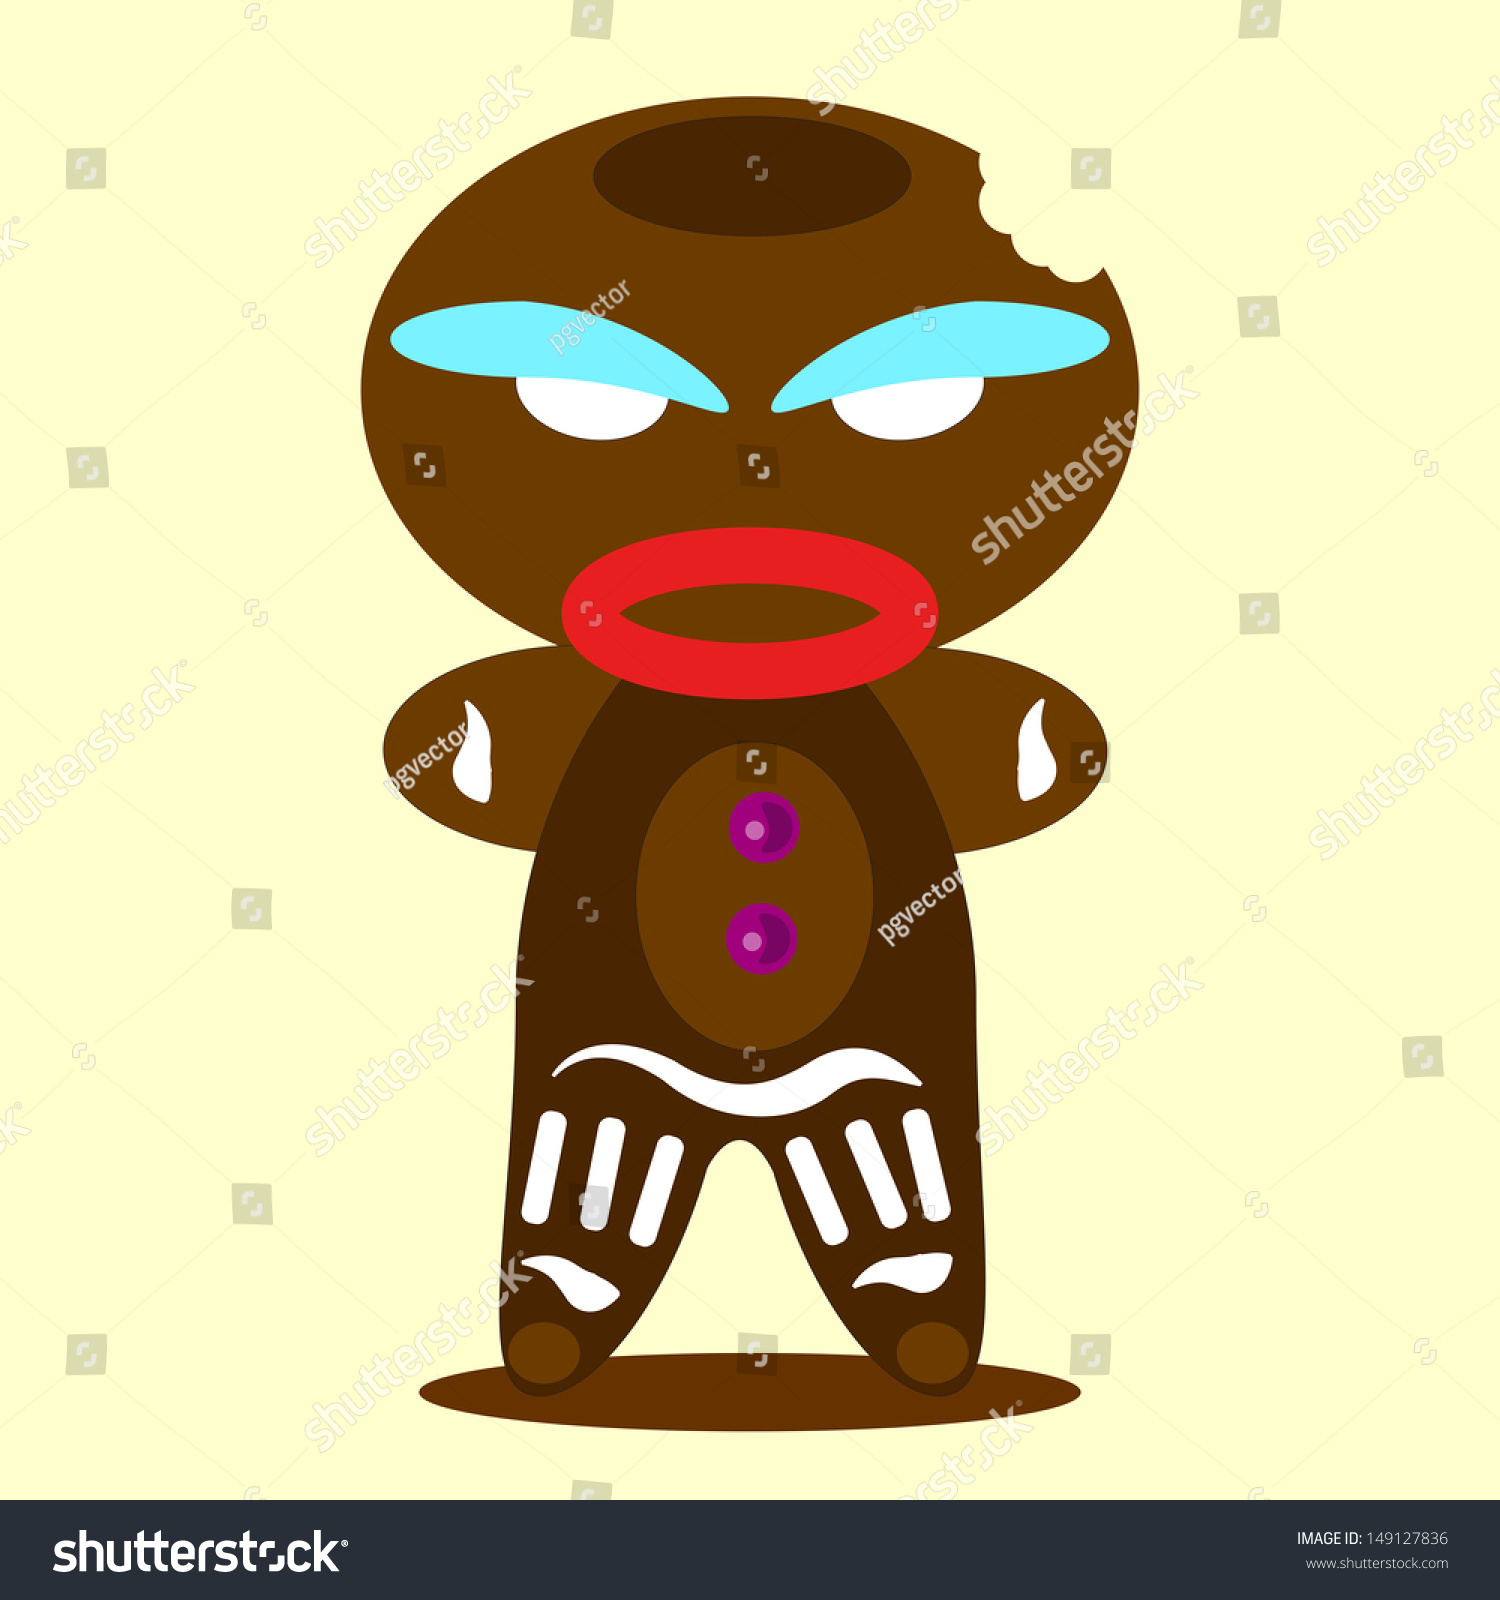 SVG of gingerbread cookie monster, angry, on a yellow background. svg